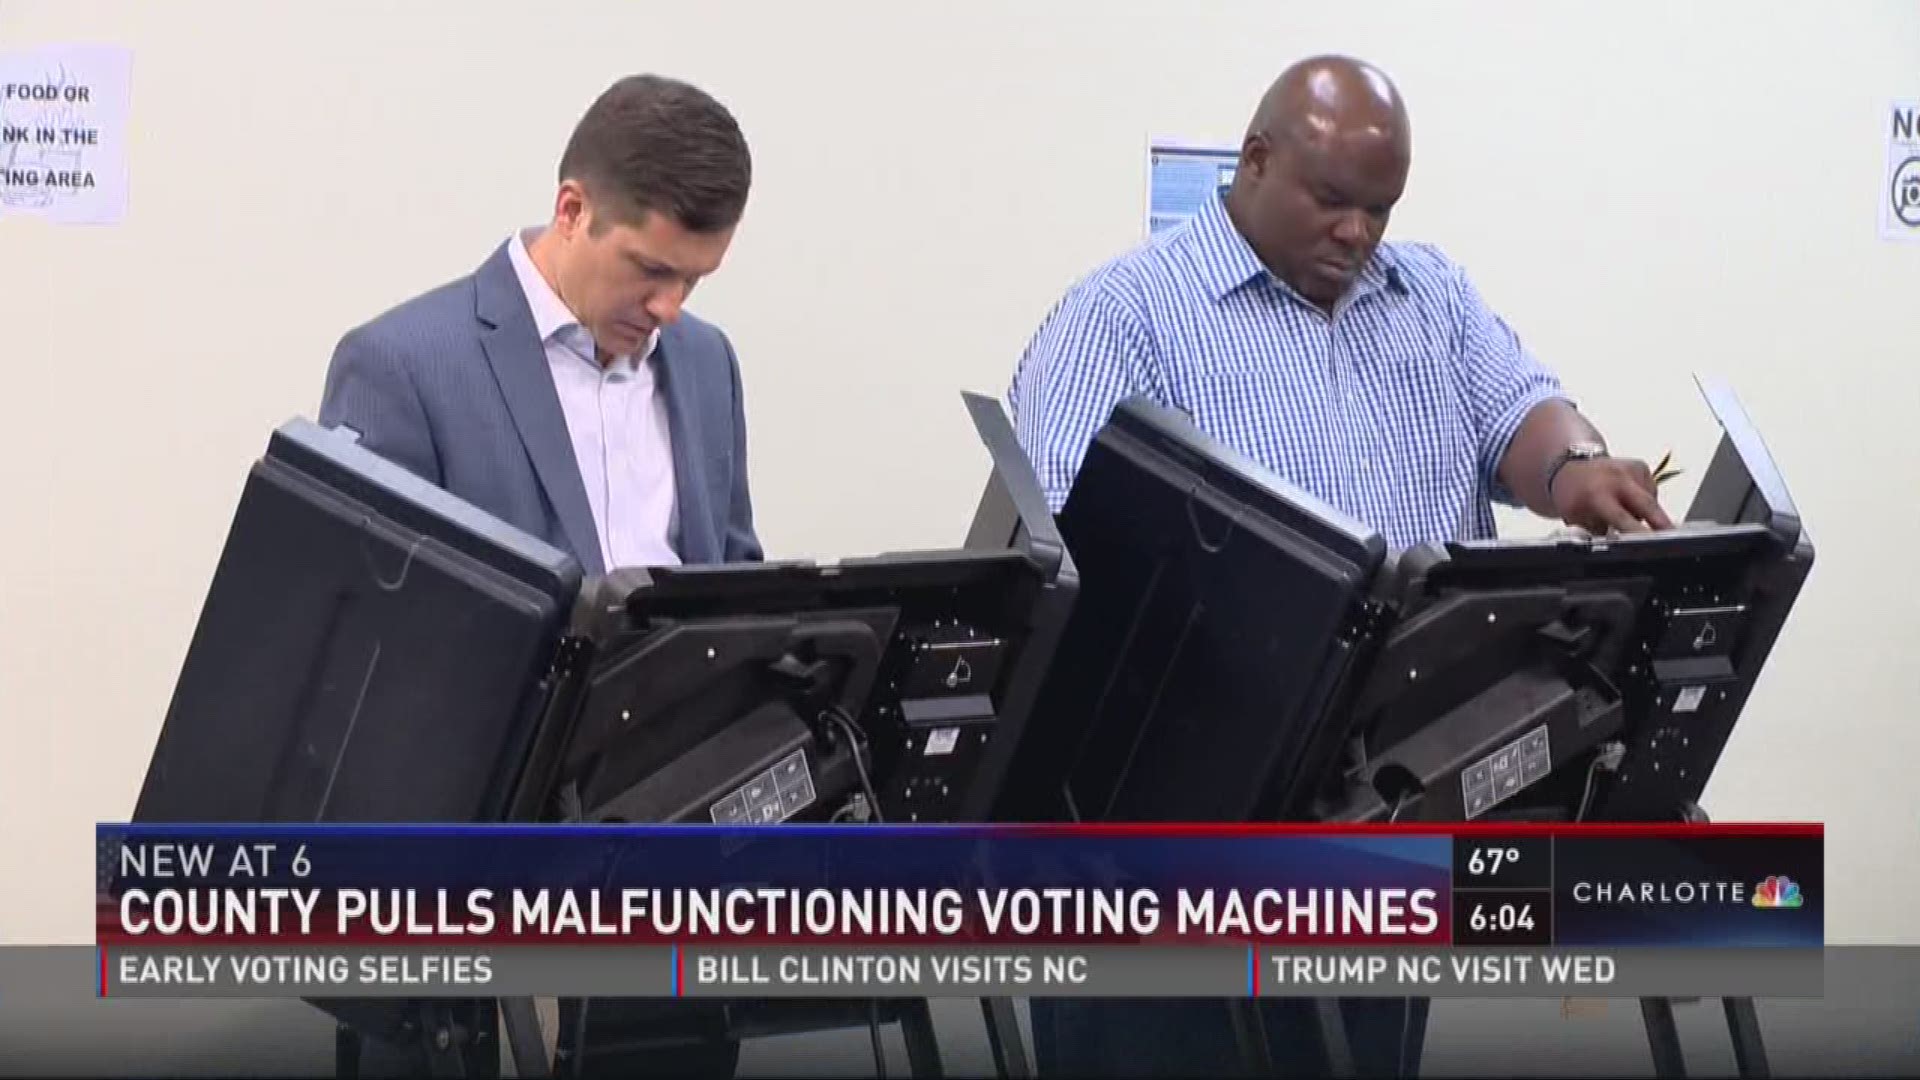 Some election officials are receiving complaints that some of the voting machines are malfunctioning.